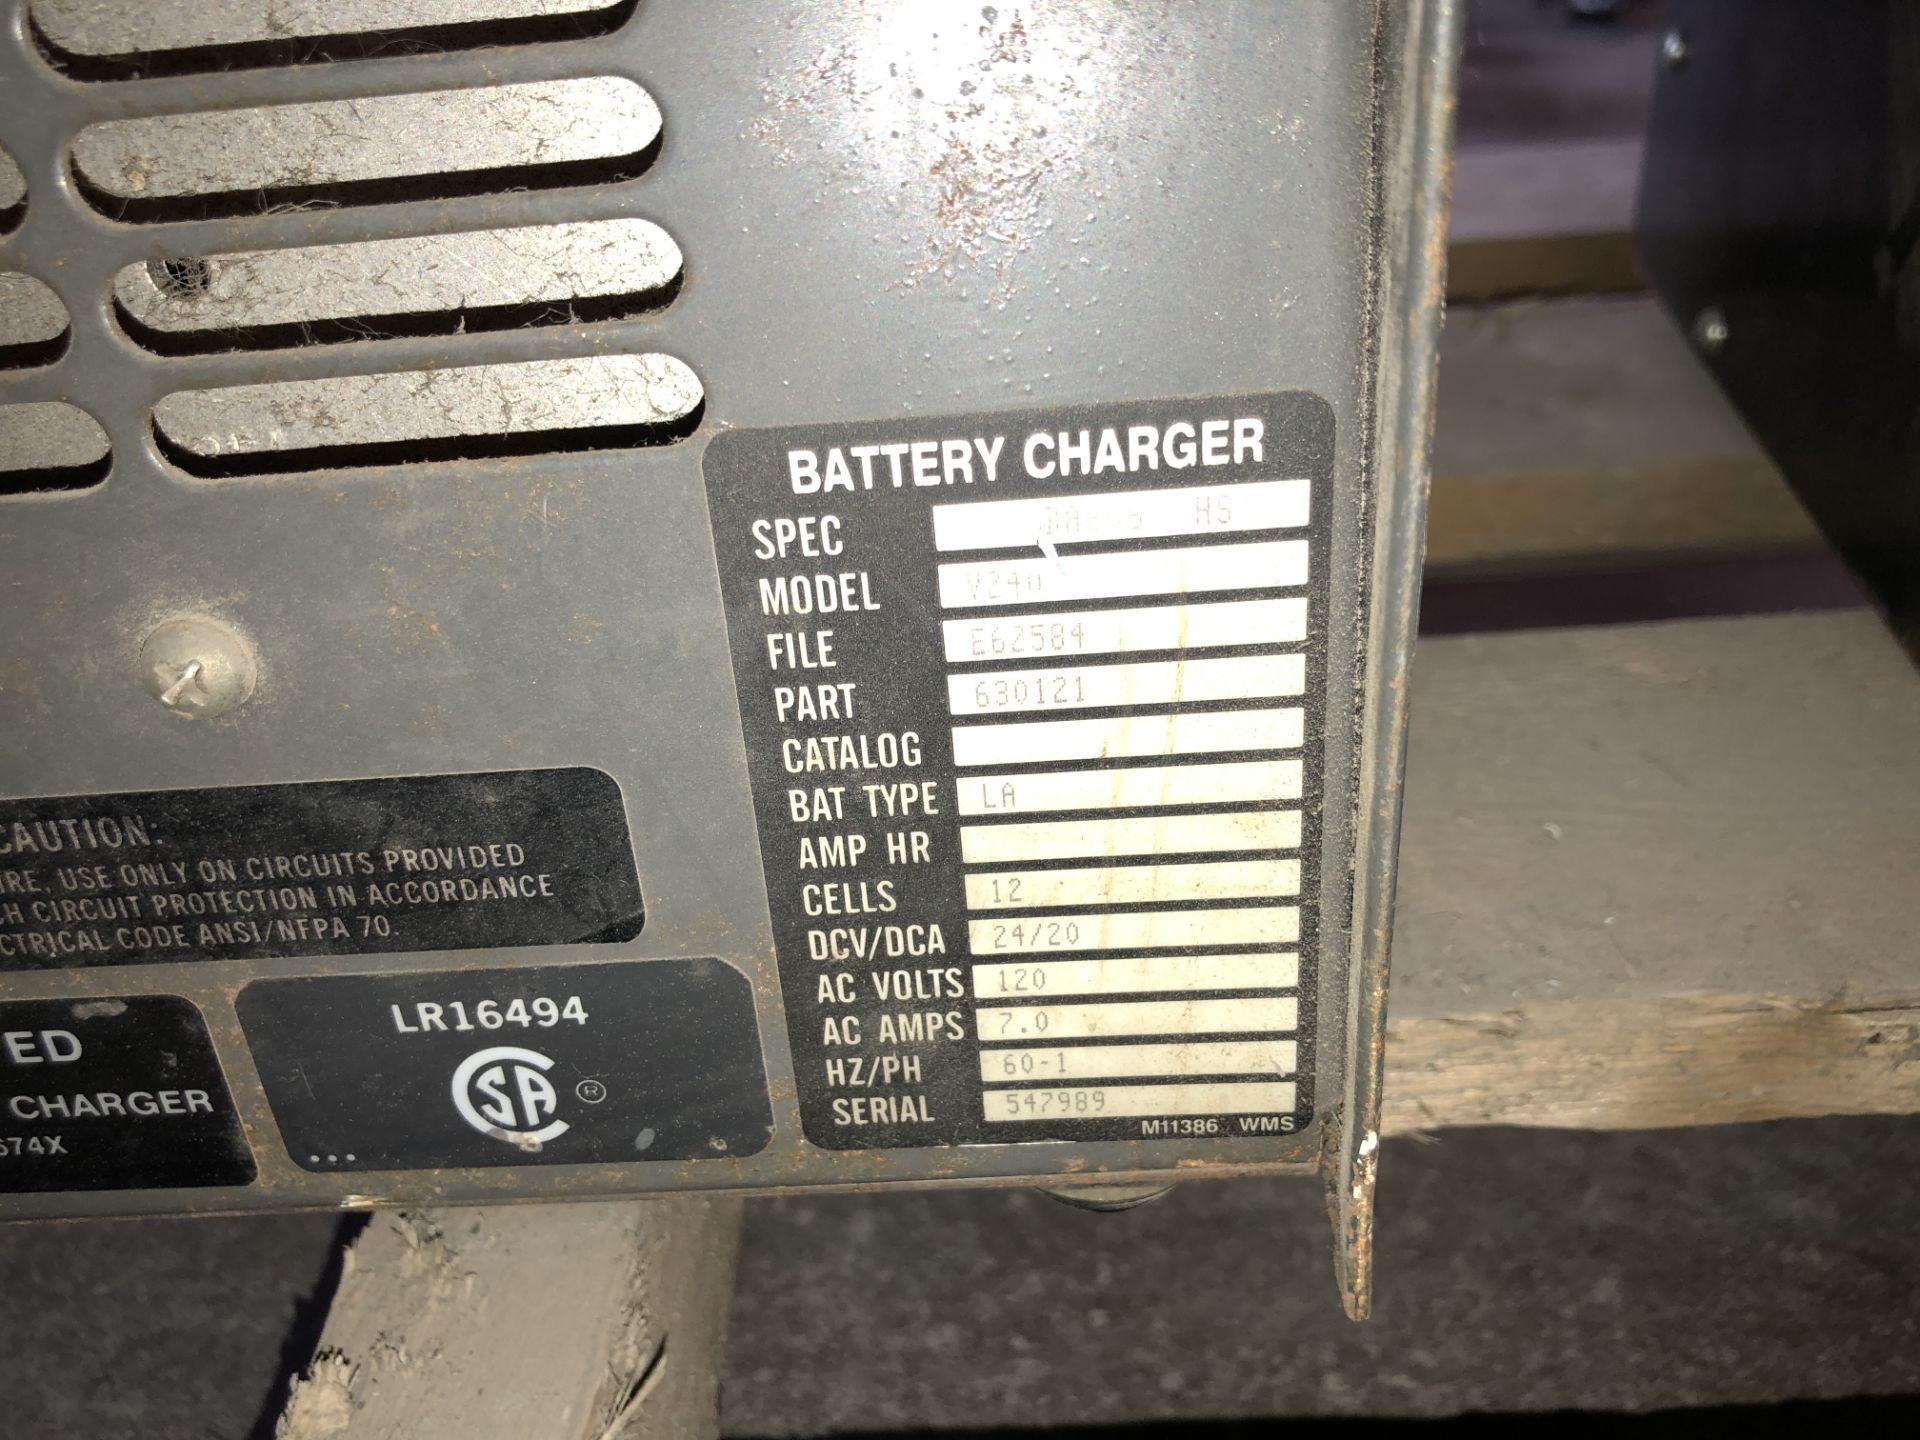 LOT OF 4 BATTERY CHARGER - Image 7 of 12